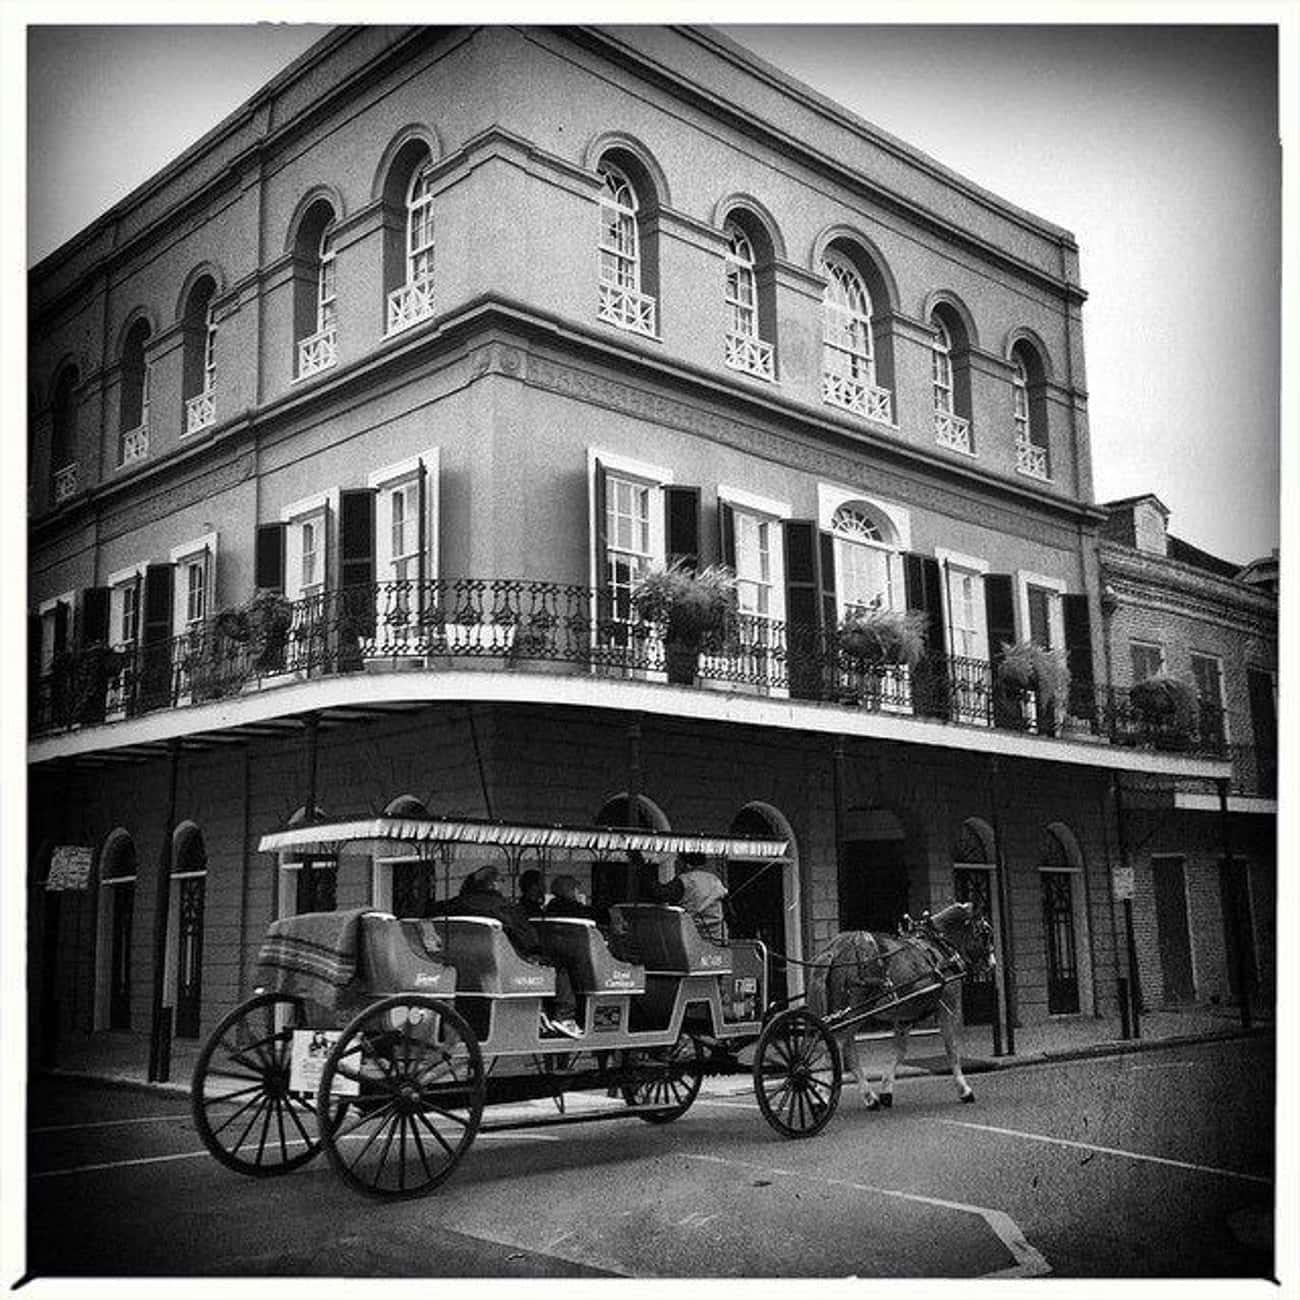 Socialite Madame Delphine McCarty LaLaurie Haunts The New Orleans Royal Street Mansion In Louisiana